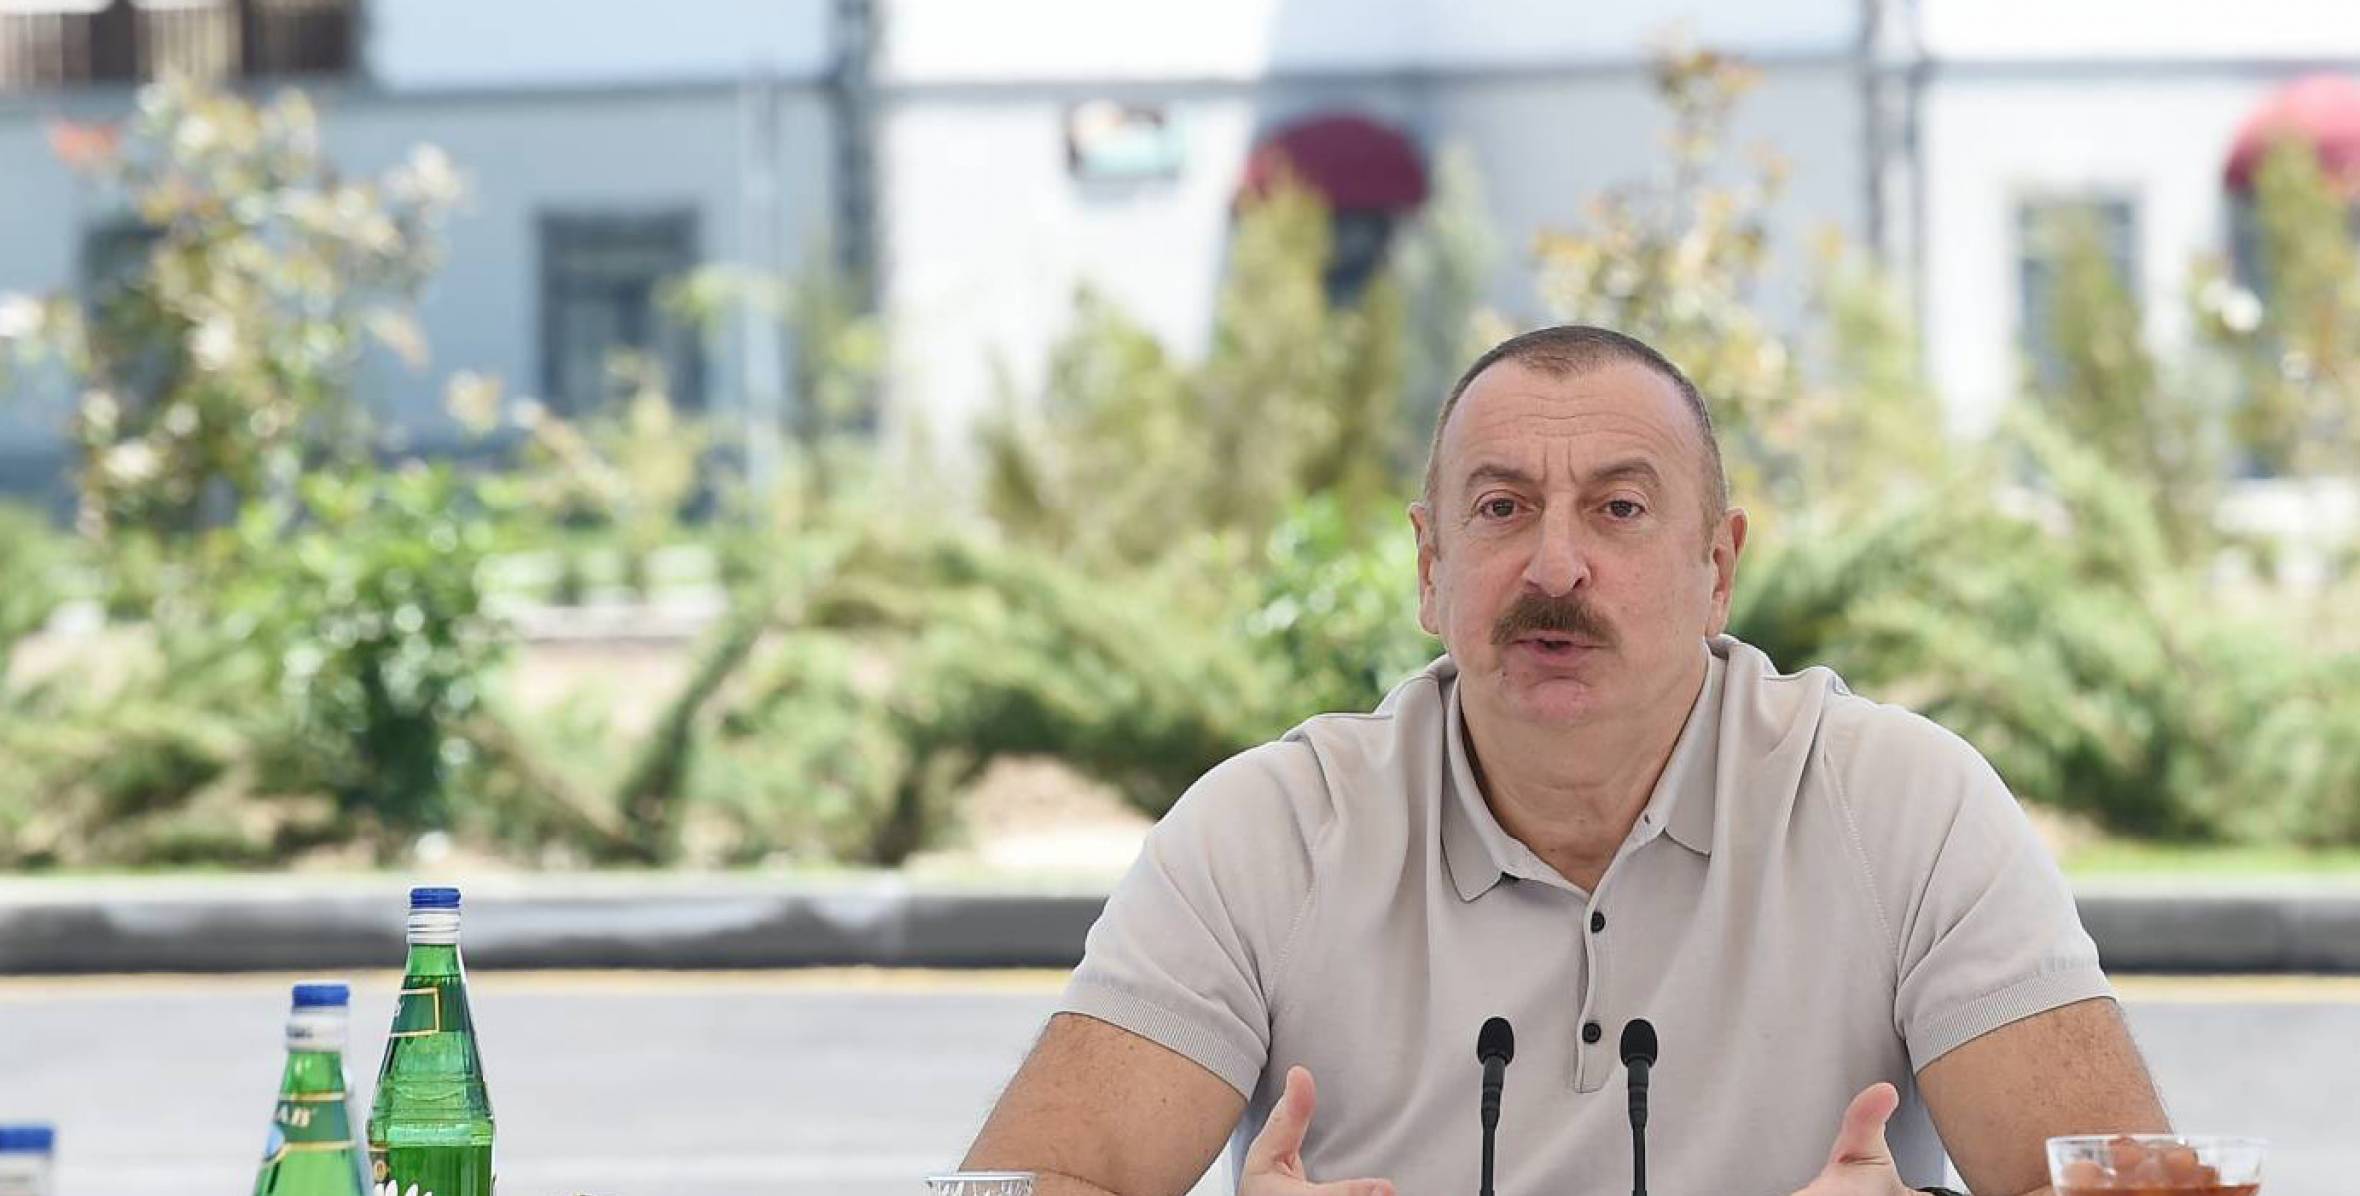 Speech by Ilham Aliyev at the opening ceremony of first stage of “Smart Village” project in Zangilan district